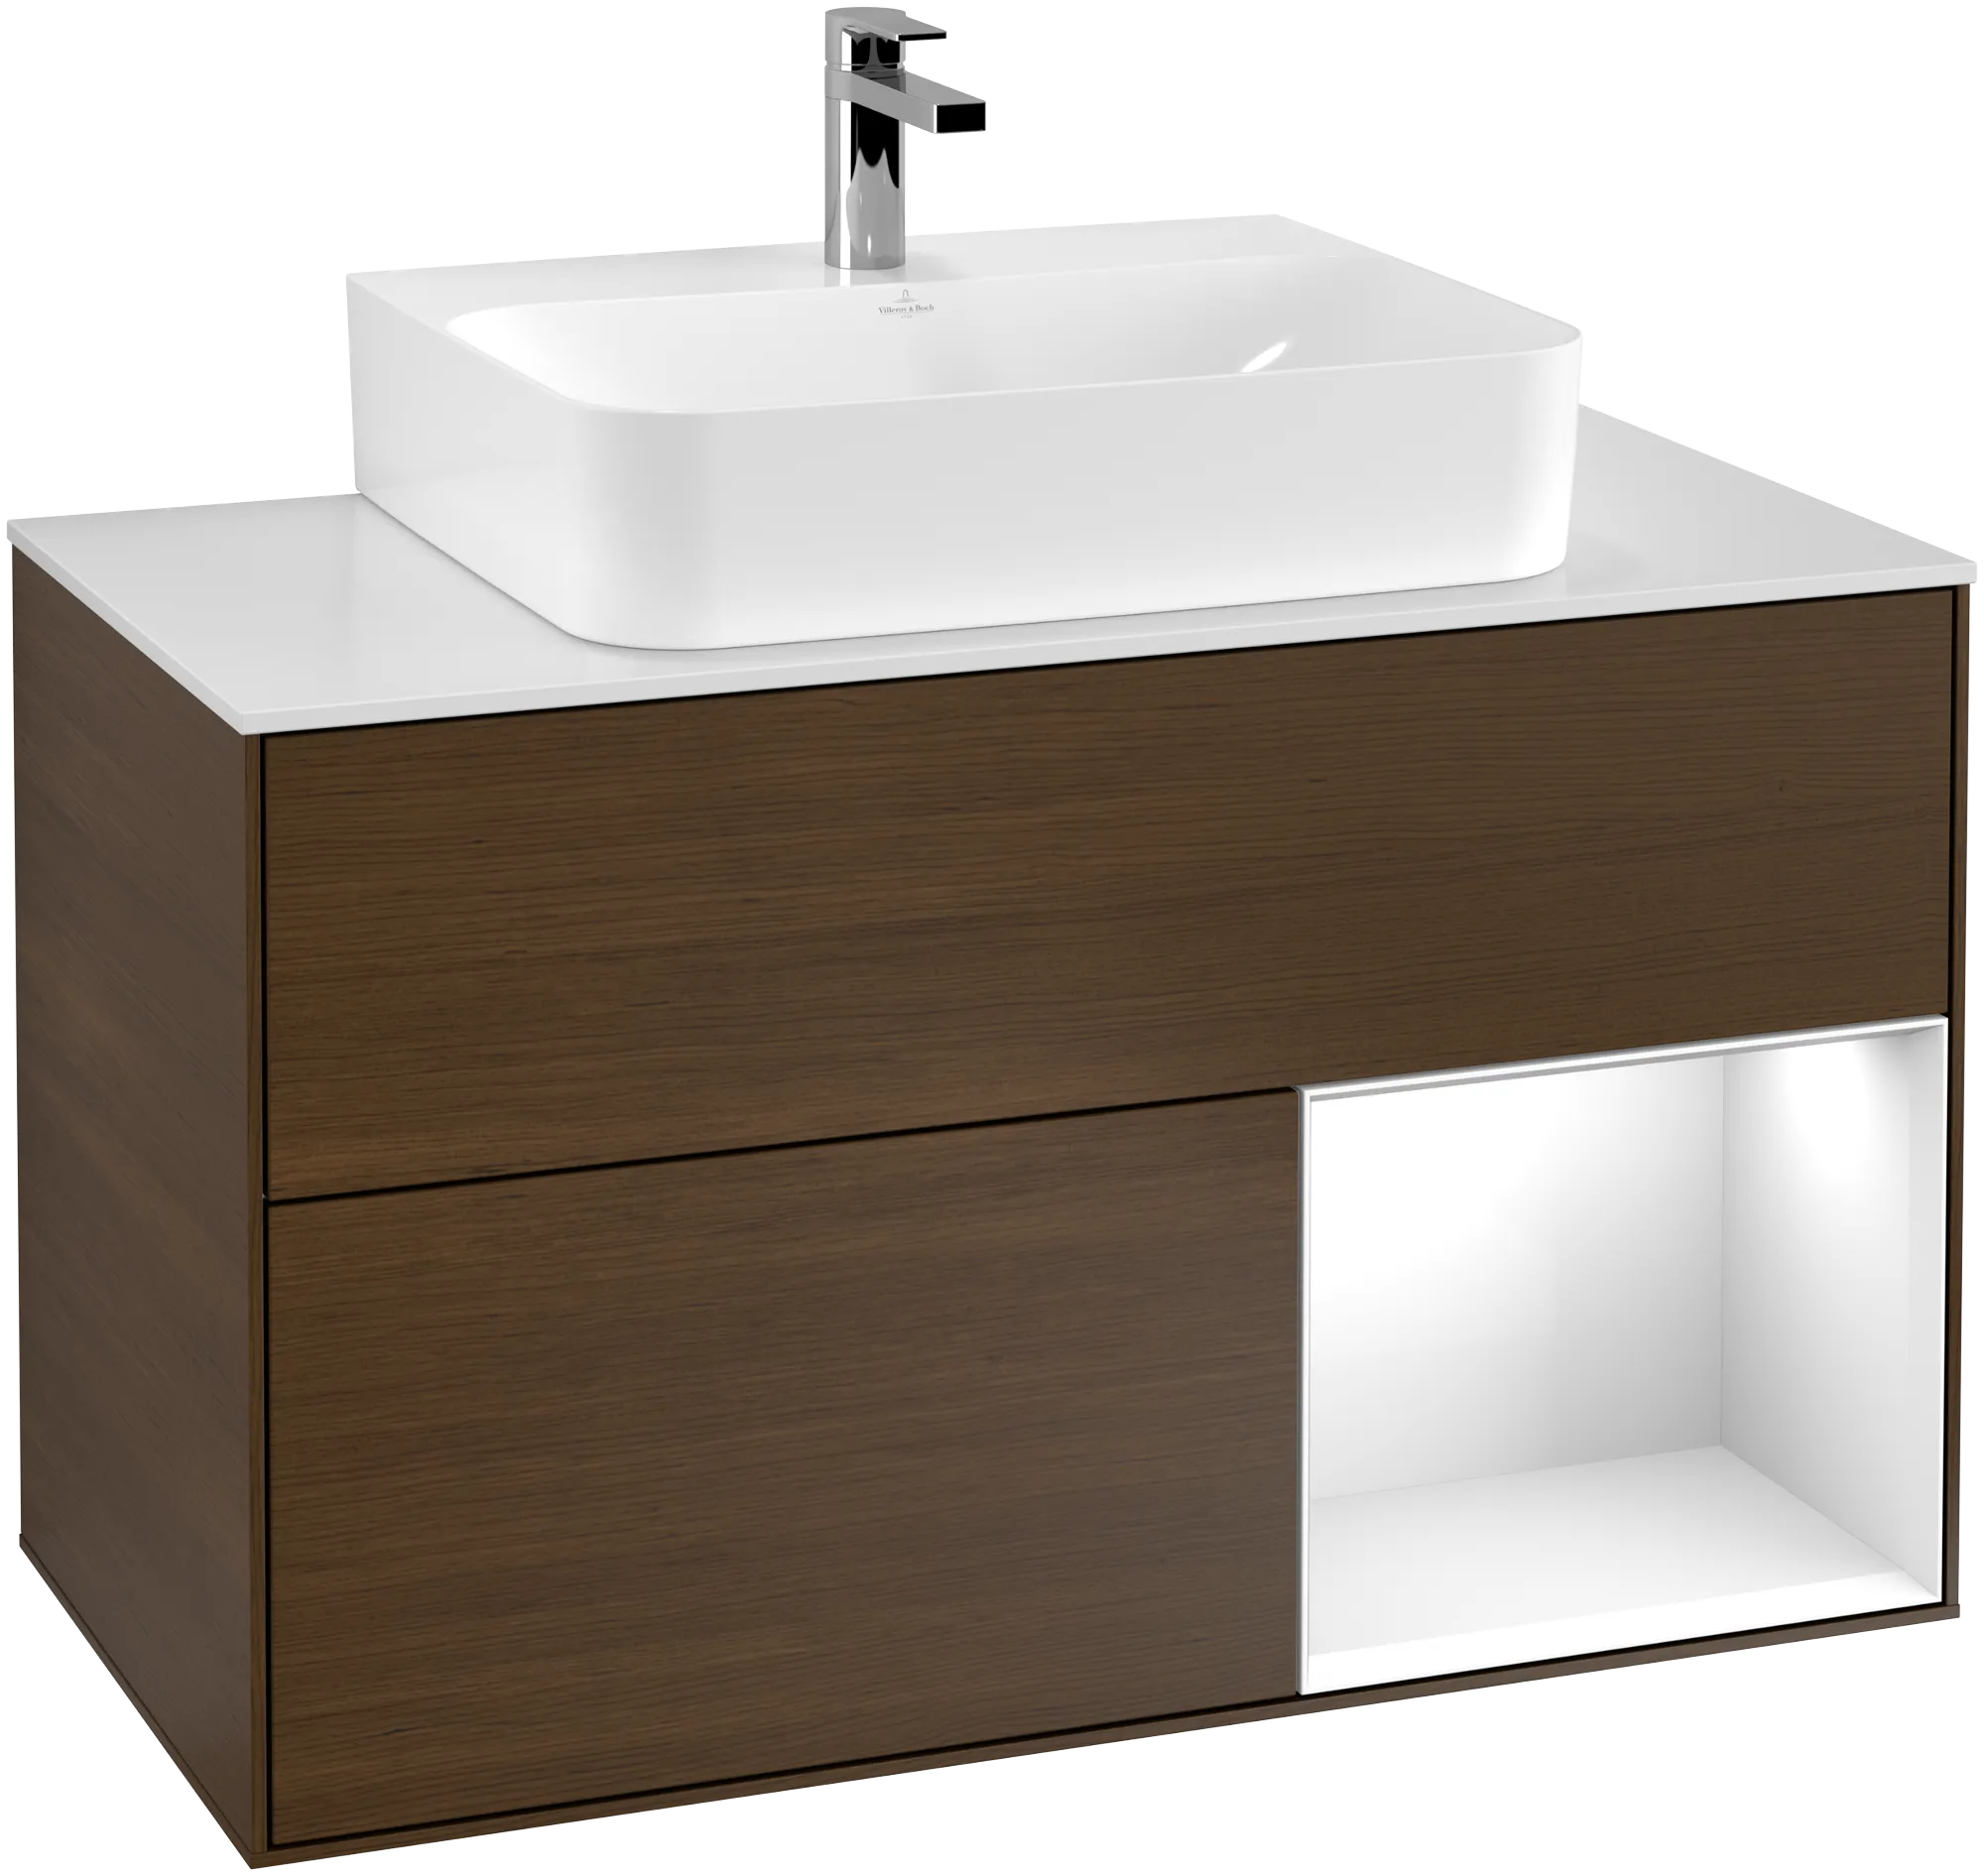 VILLEROY BOCH Finion Vanity unit, with lighting, 2 pull-out compartments, 1000 x 603 x 501 mm, Walnut Veneer / Glossy White Lacquer / Glass White Matt #G121GFGN resmi